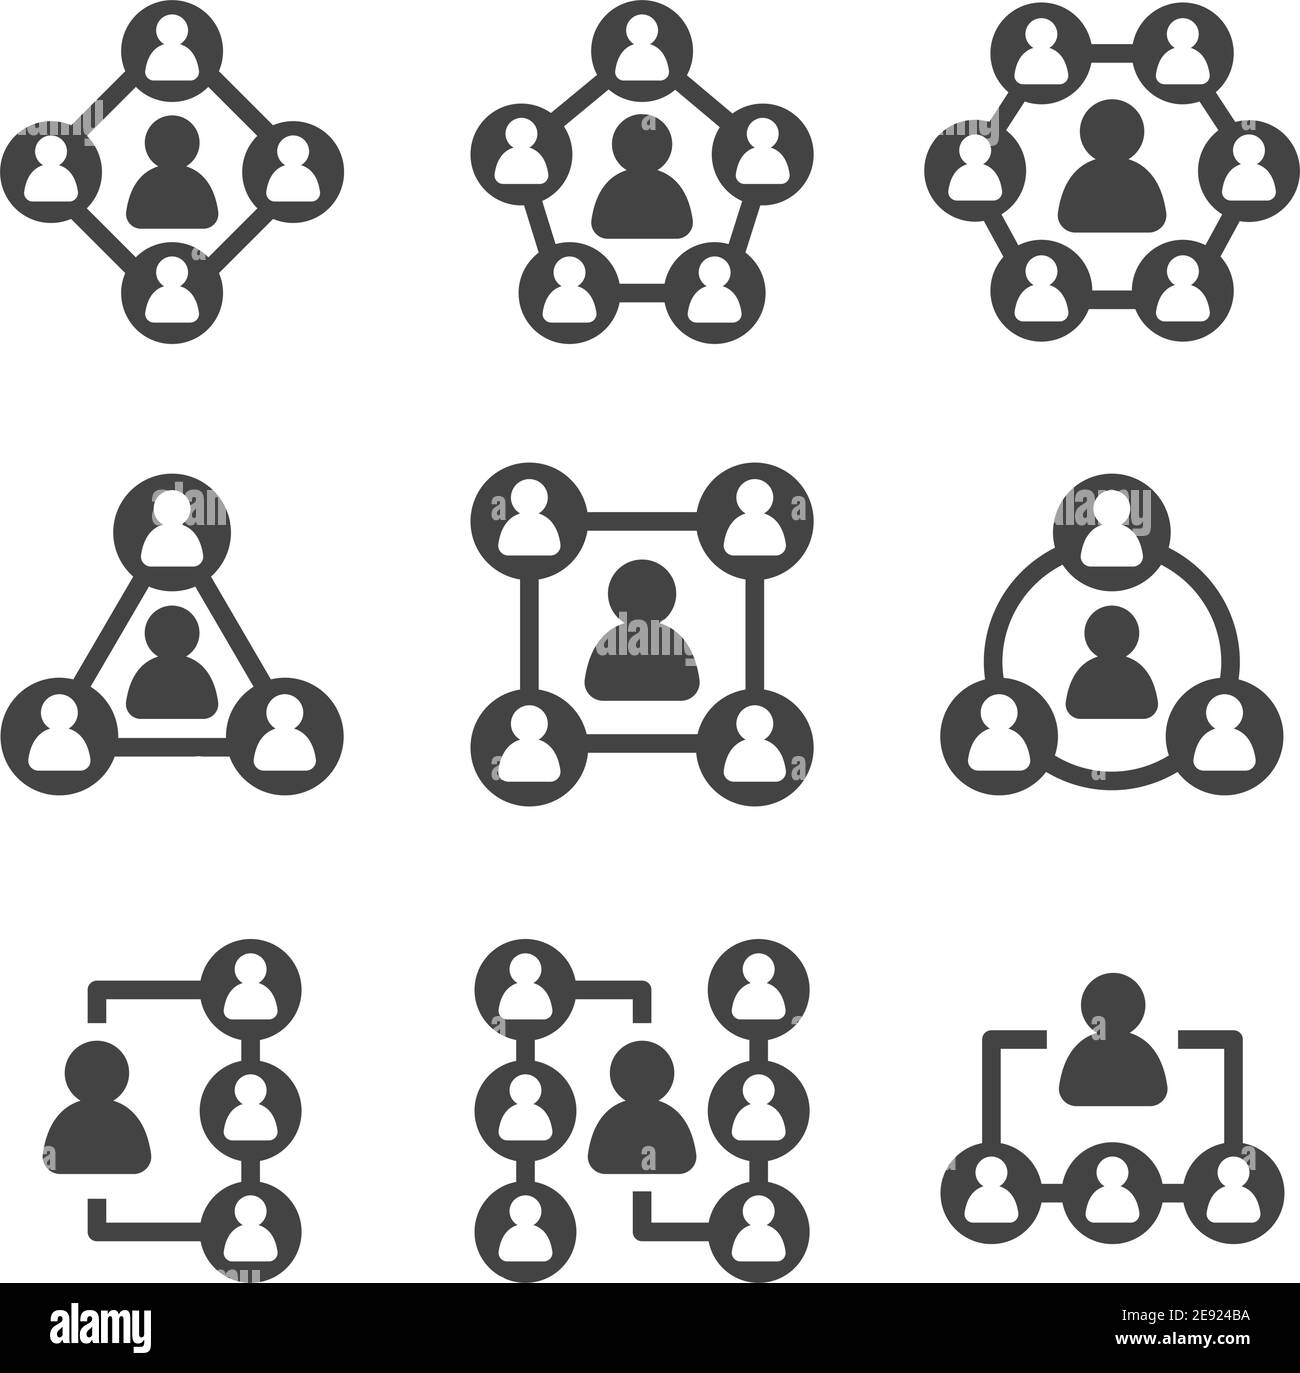 people network and connecting people icon set,vector and illustration Stock Vector